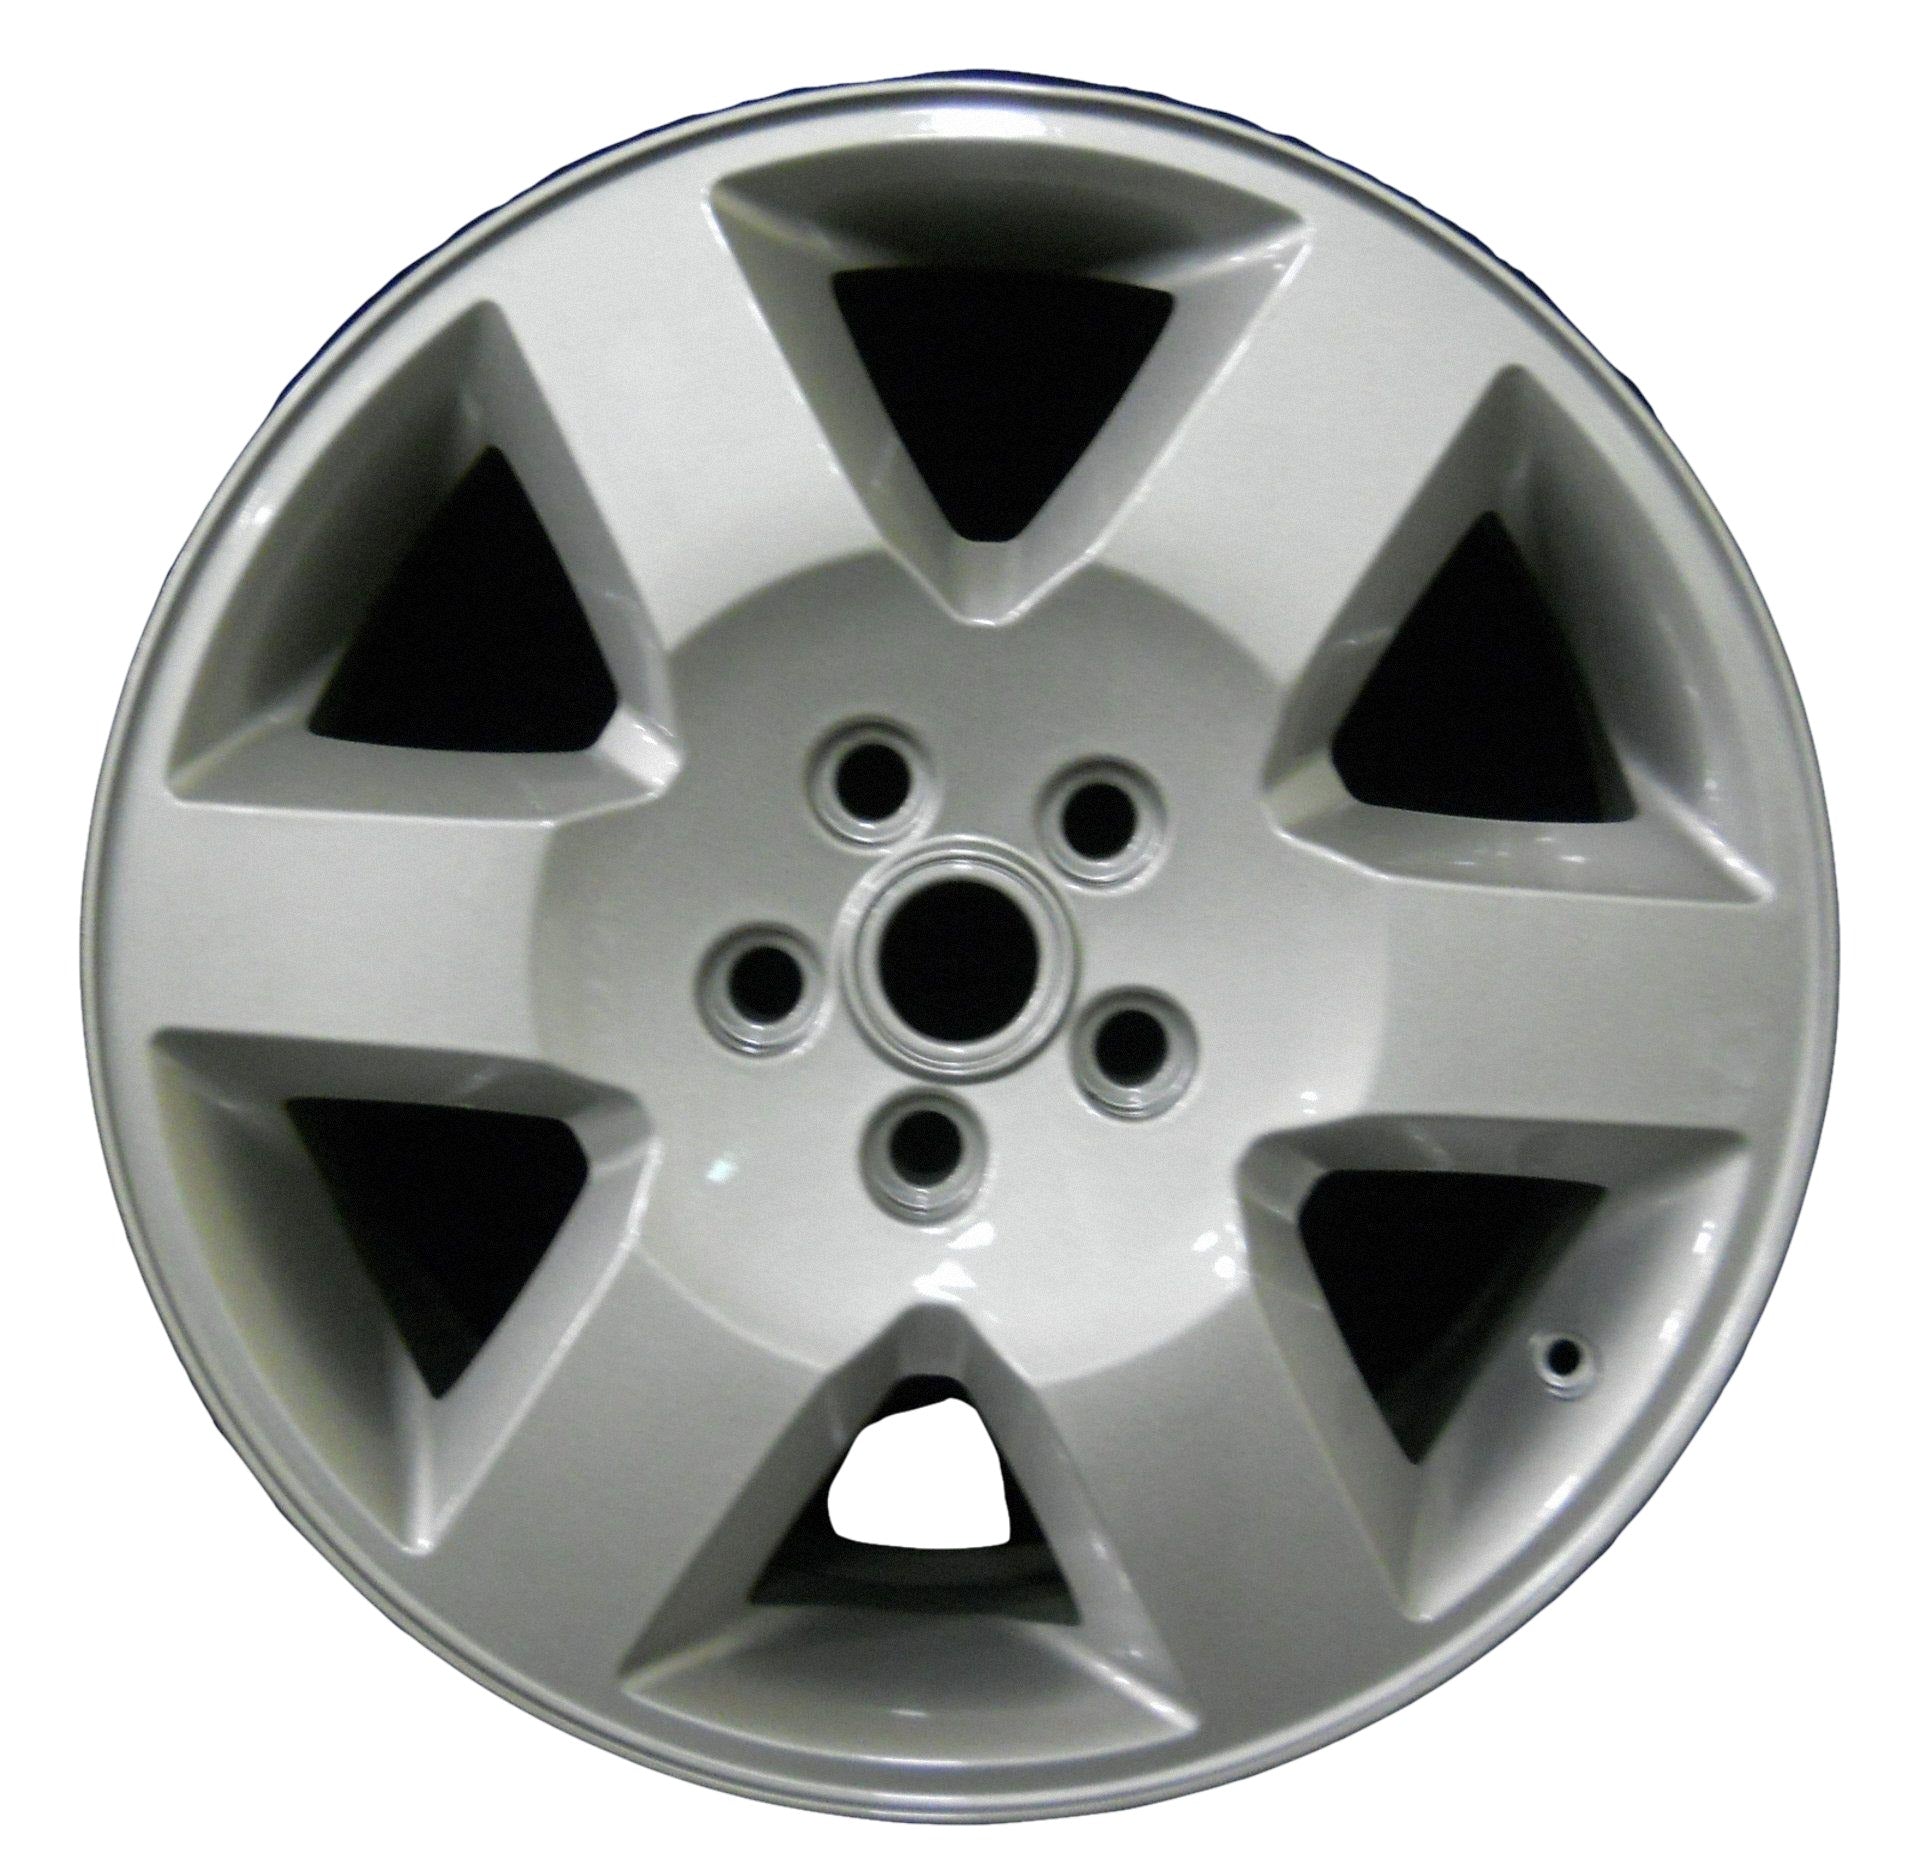 Land Rover LR3  2005, 2006, 2007, 2008 Factory OEM Car Wheel Size 19x8 Alloy WAO.72191.PS02.FF